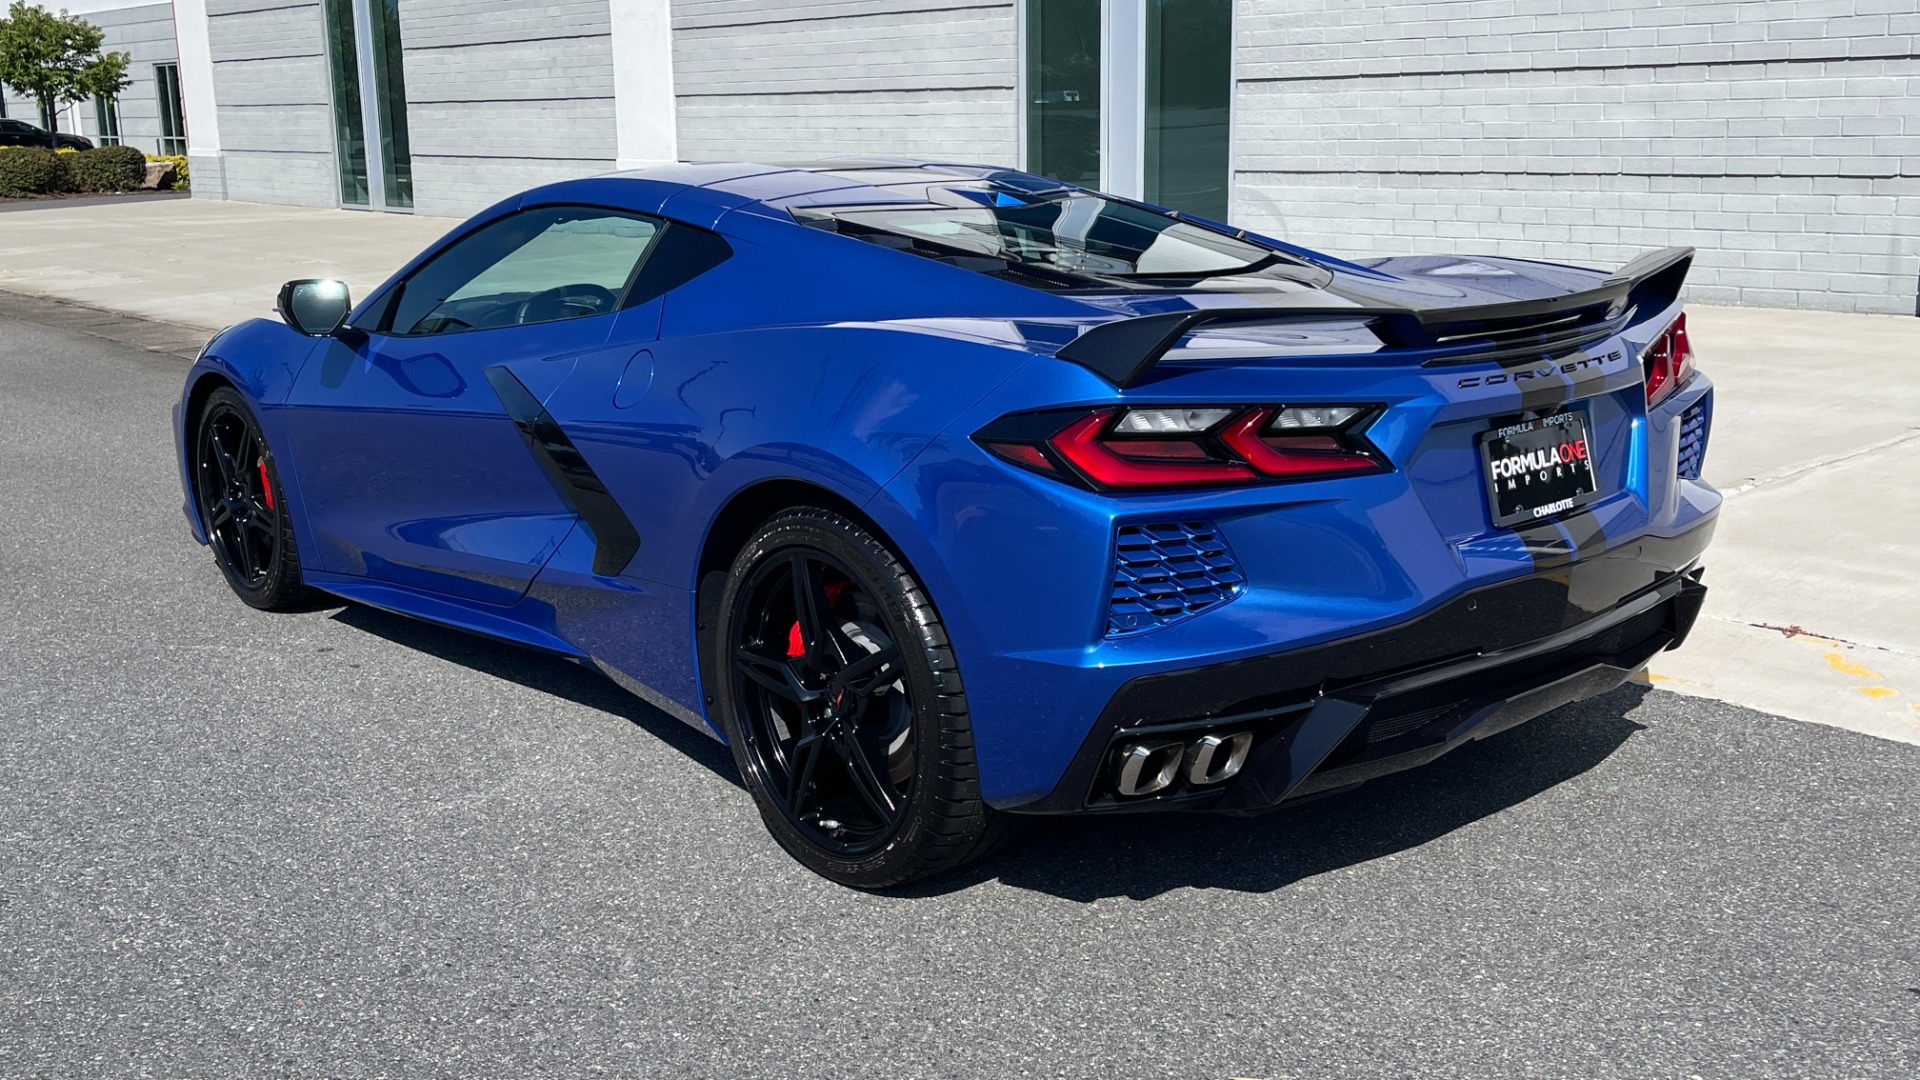 Used 2021 Chevrolet CORVETTE STINGRAY 3LT COUPE / 8-SPD / PERF PKG / NAV / BOSE / REARVIEW for sale Sold at Formula Imports in Charlotte NC 28227 2